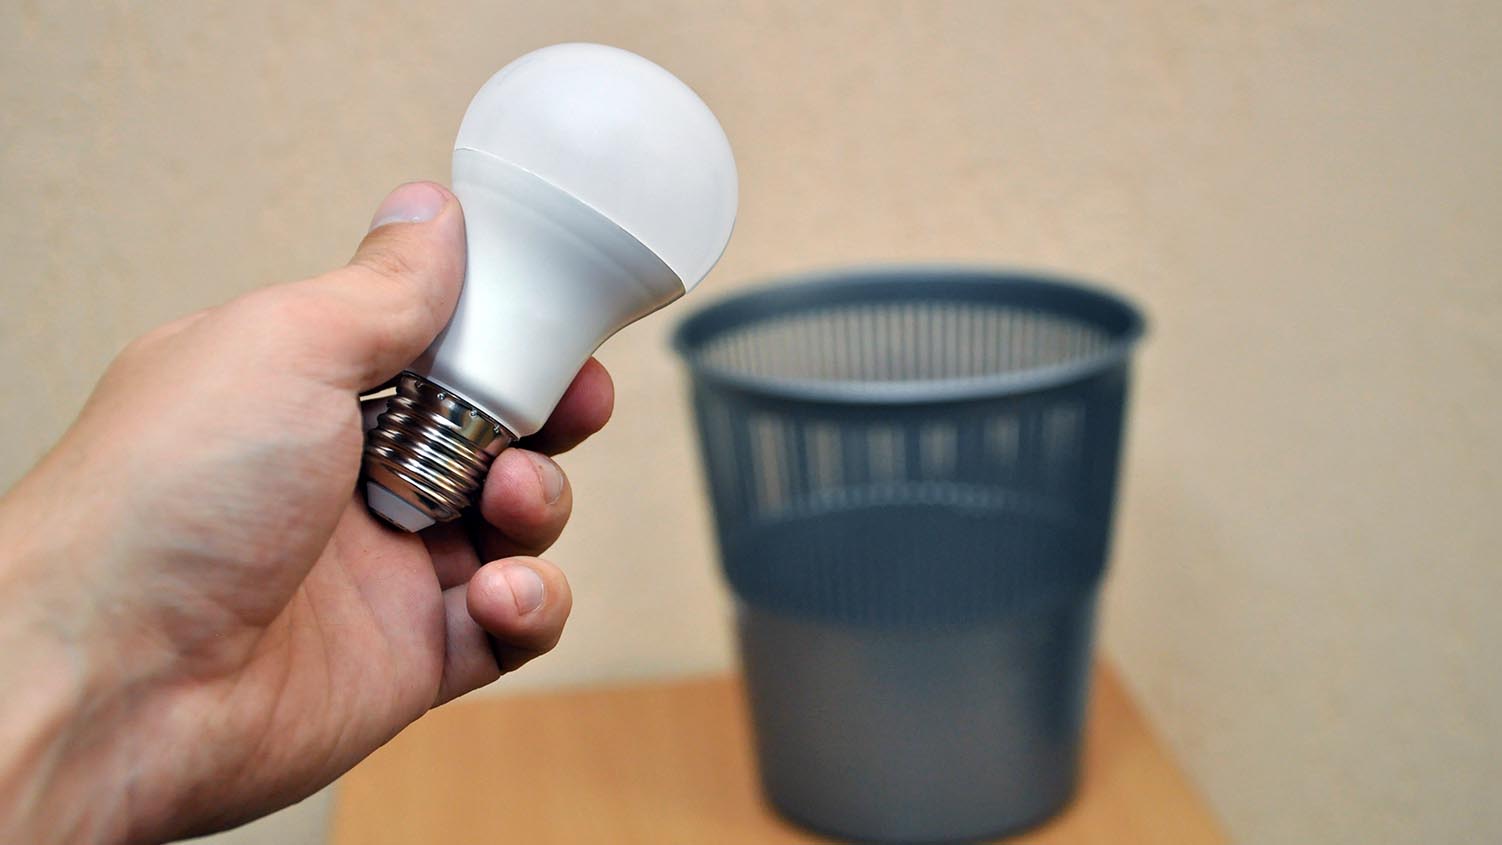 How To Dispose An LED Bulb